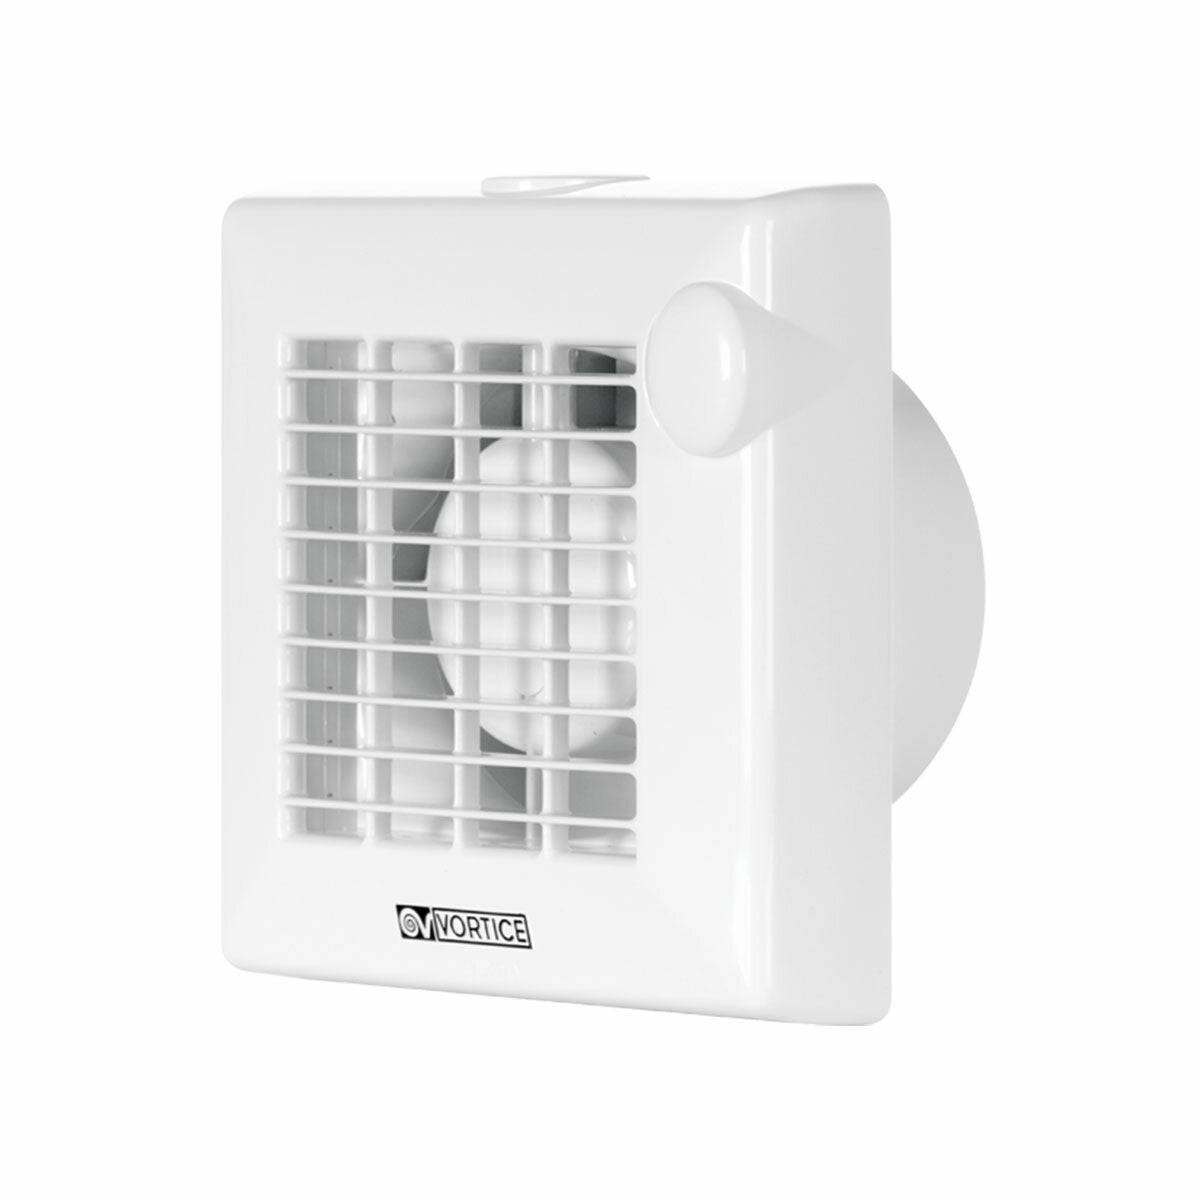 Vortice M 100/4" wall-mounted extractor